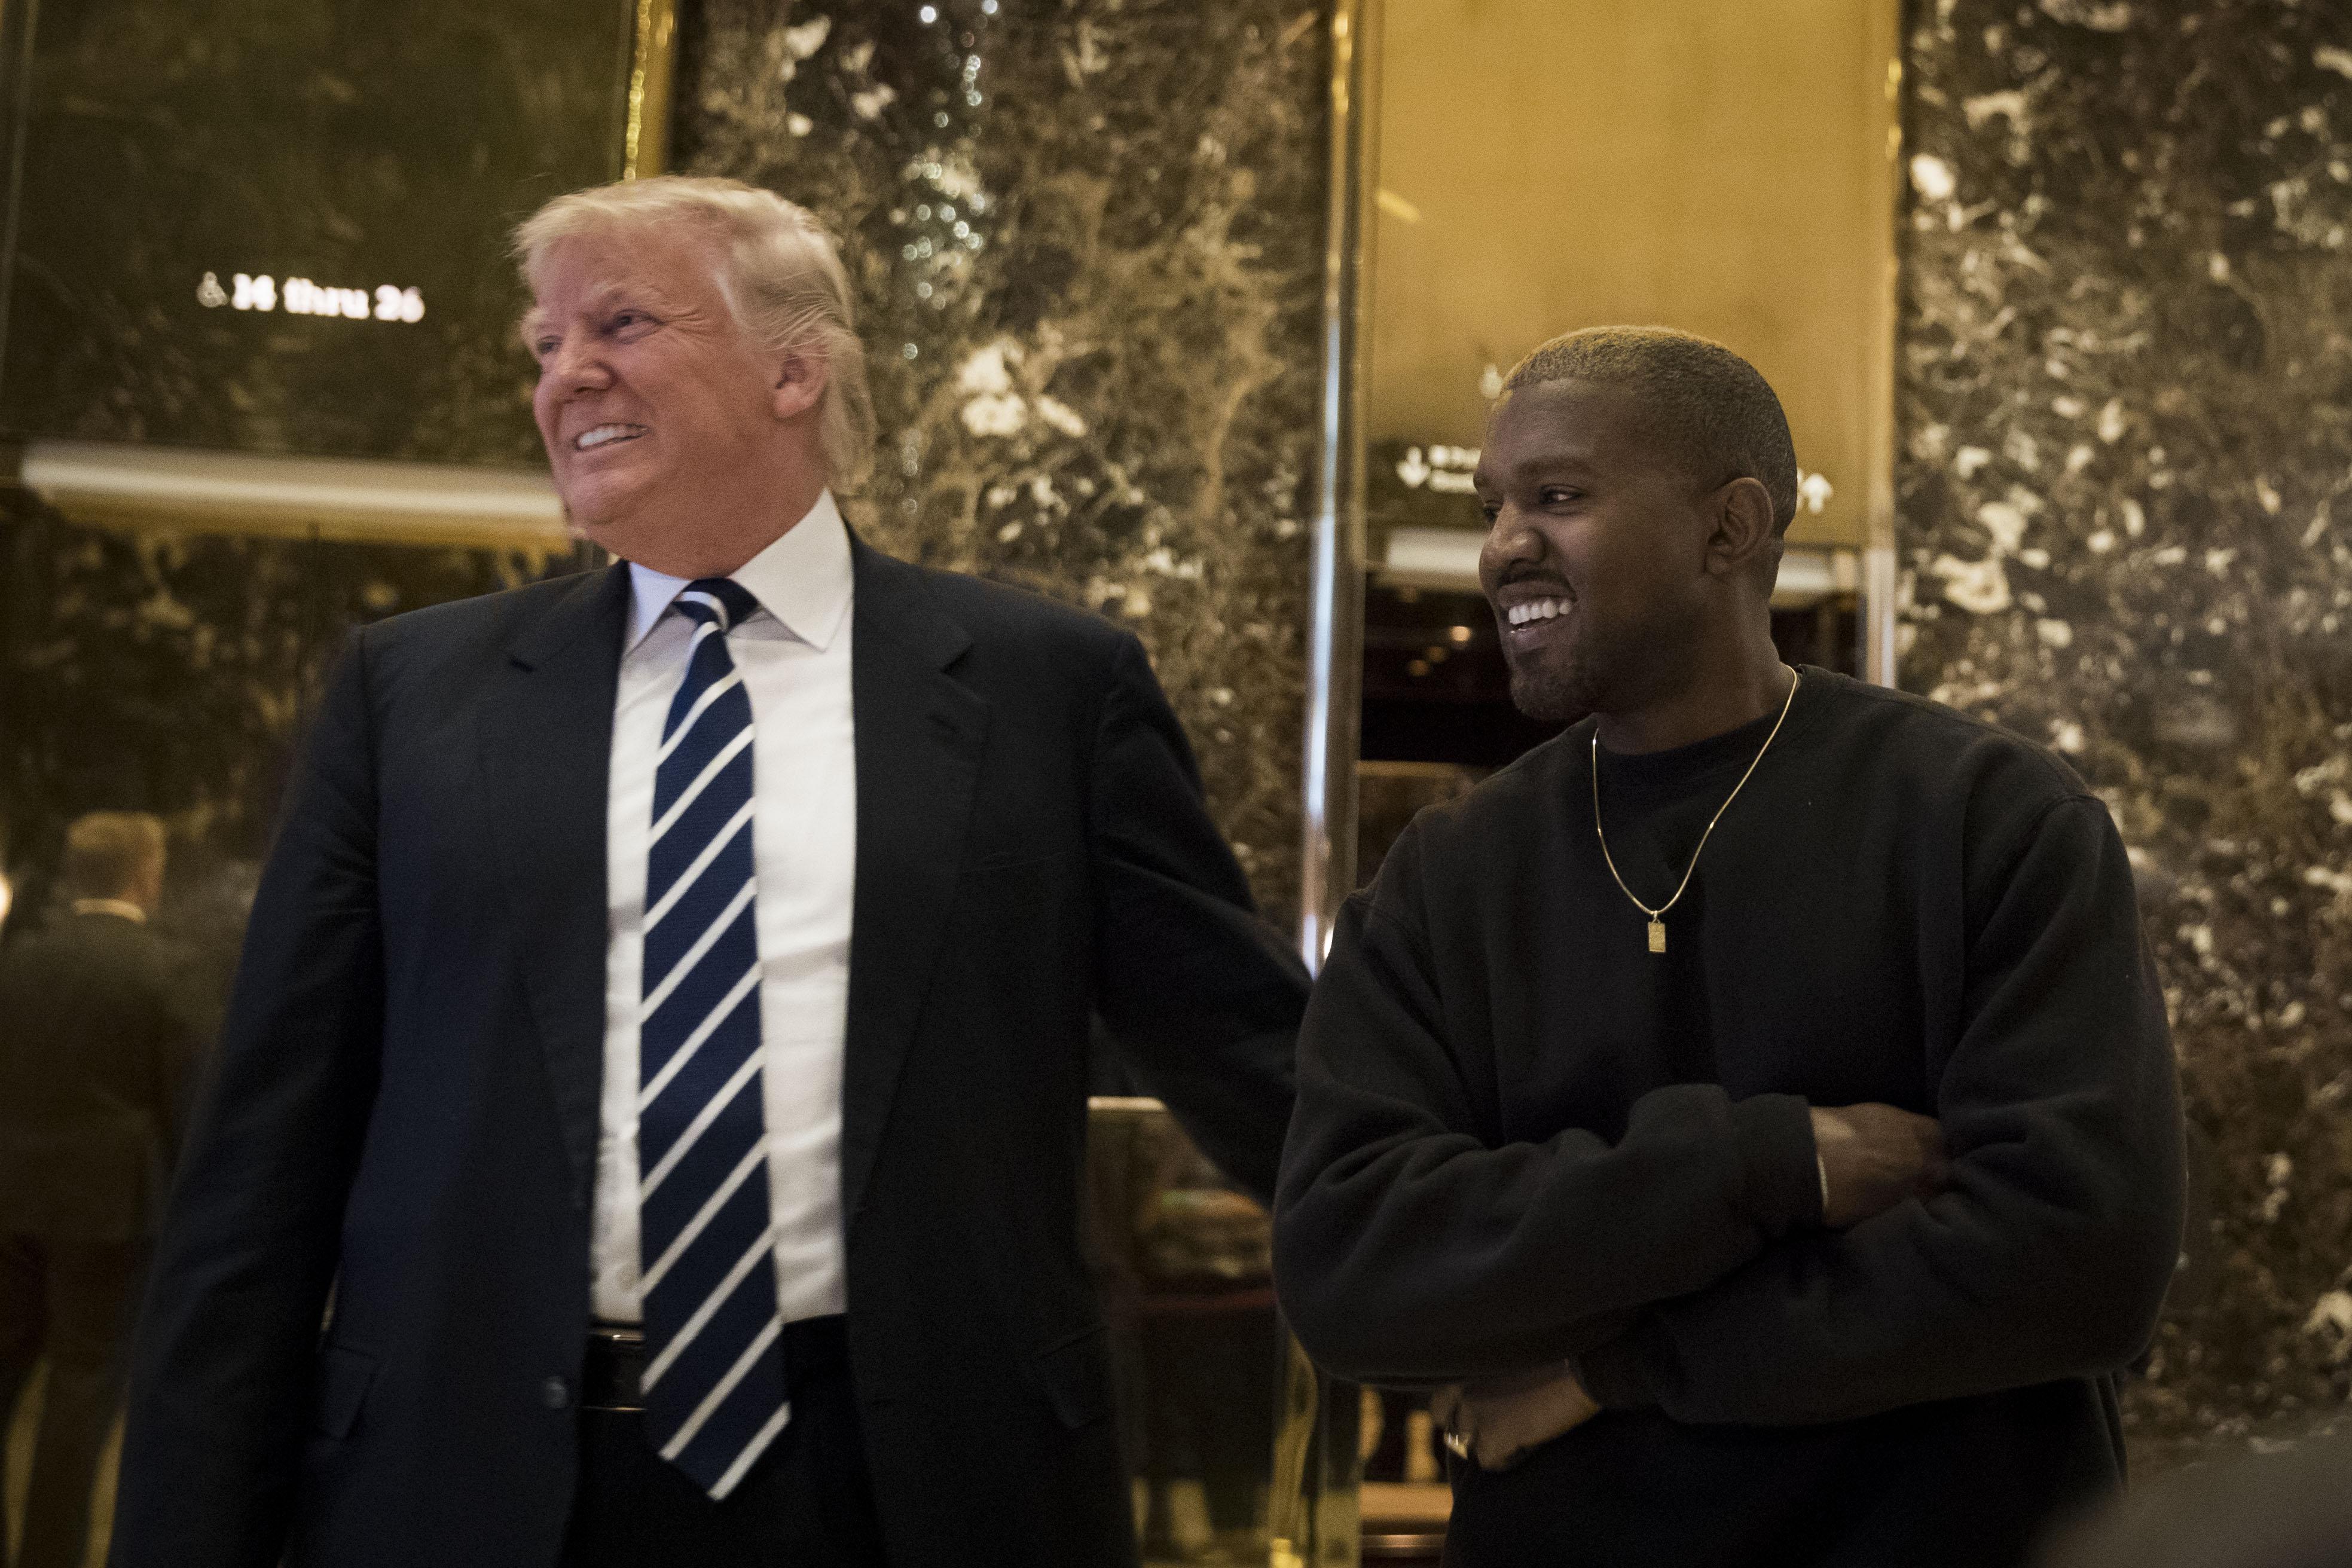 President-elect Donald Trump and Kanye West stand together in the lobby at Trump Tower, December 13, 2016 in New York City. President-elect Donald Trump and his transition team are in the process of filling cabinet and other high level positions for the new administration.